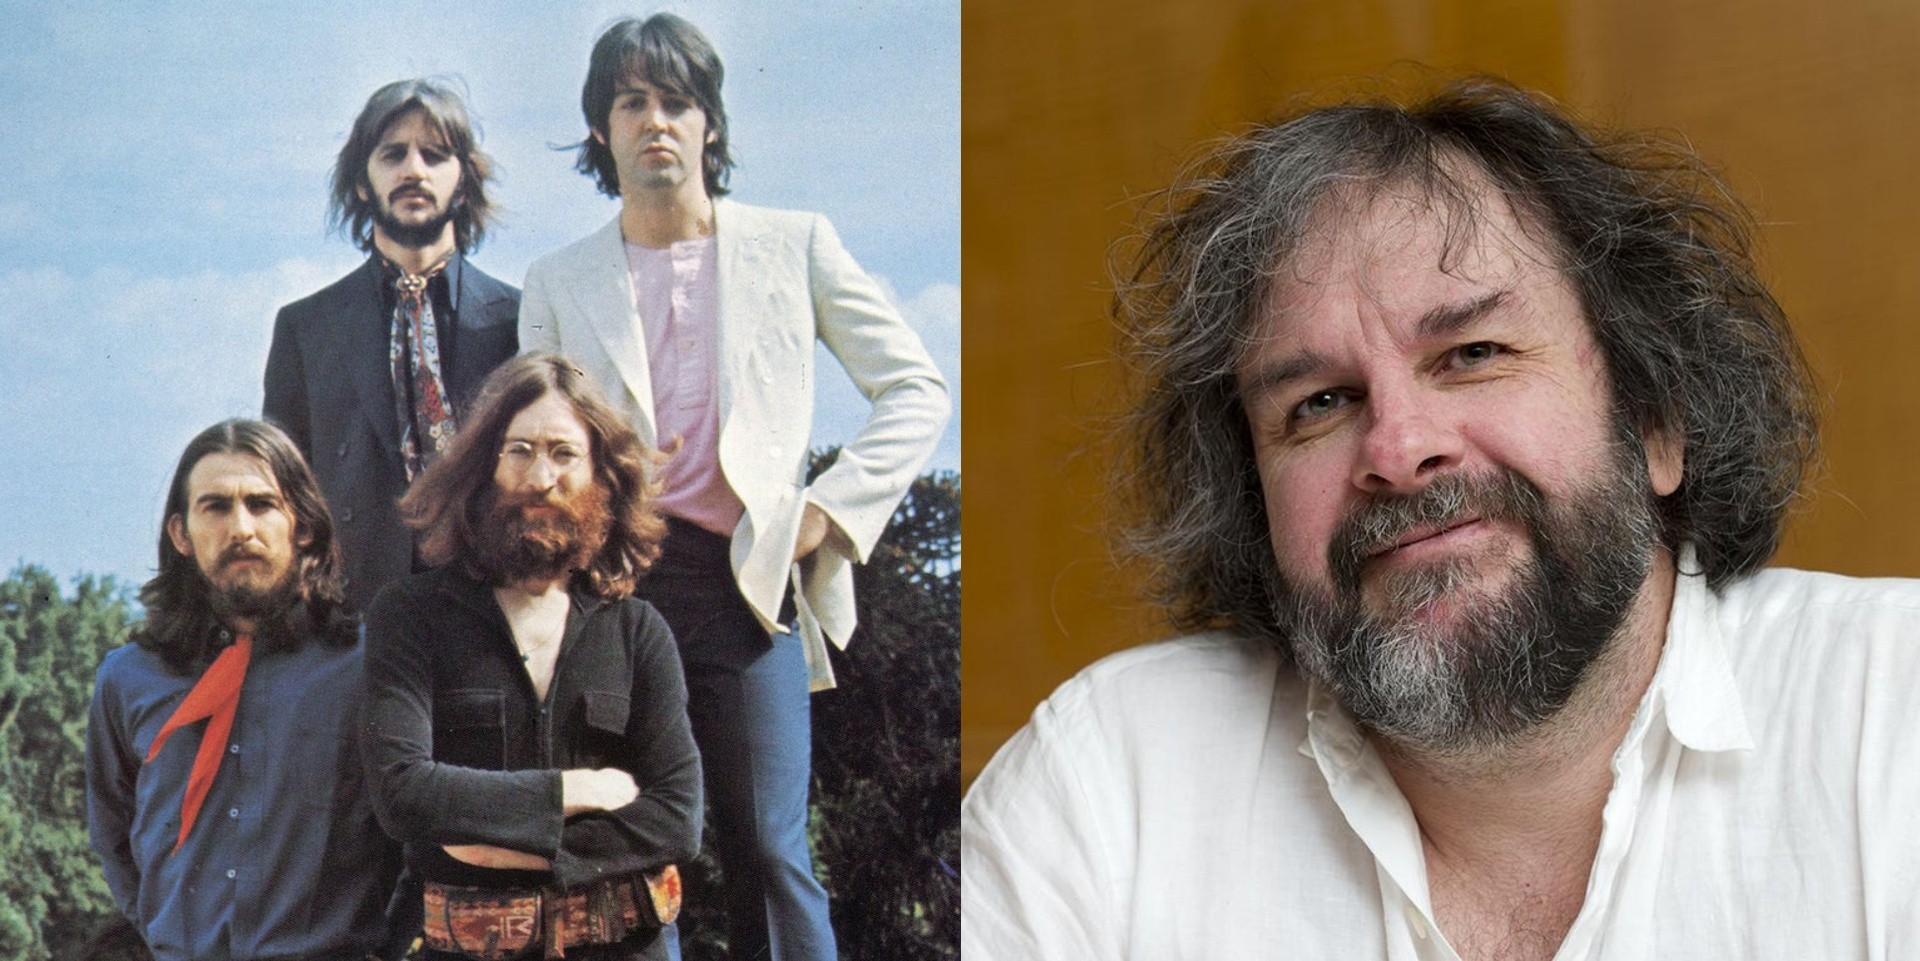 A new film about The Beatles to be directed by Peter Jackson